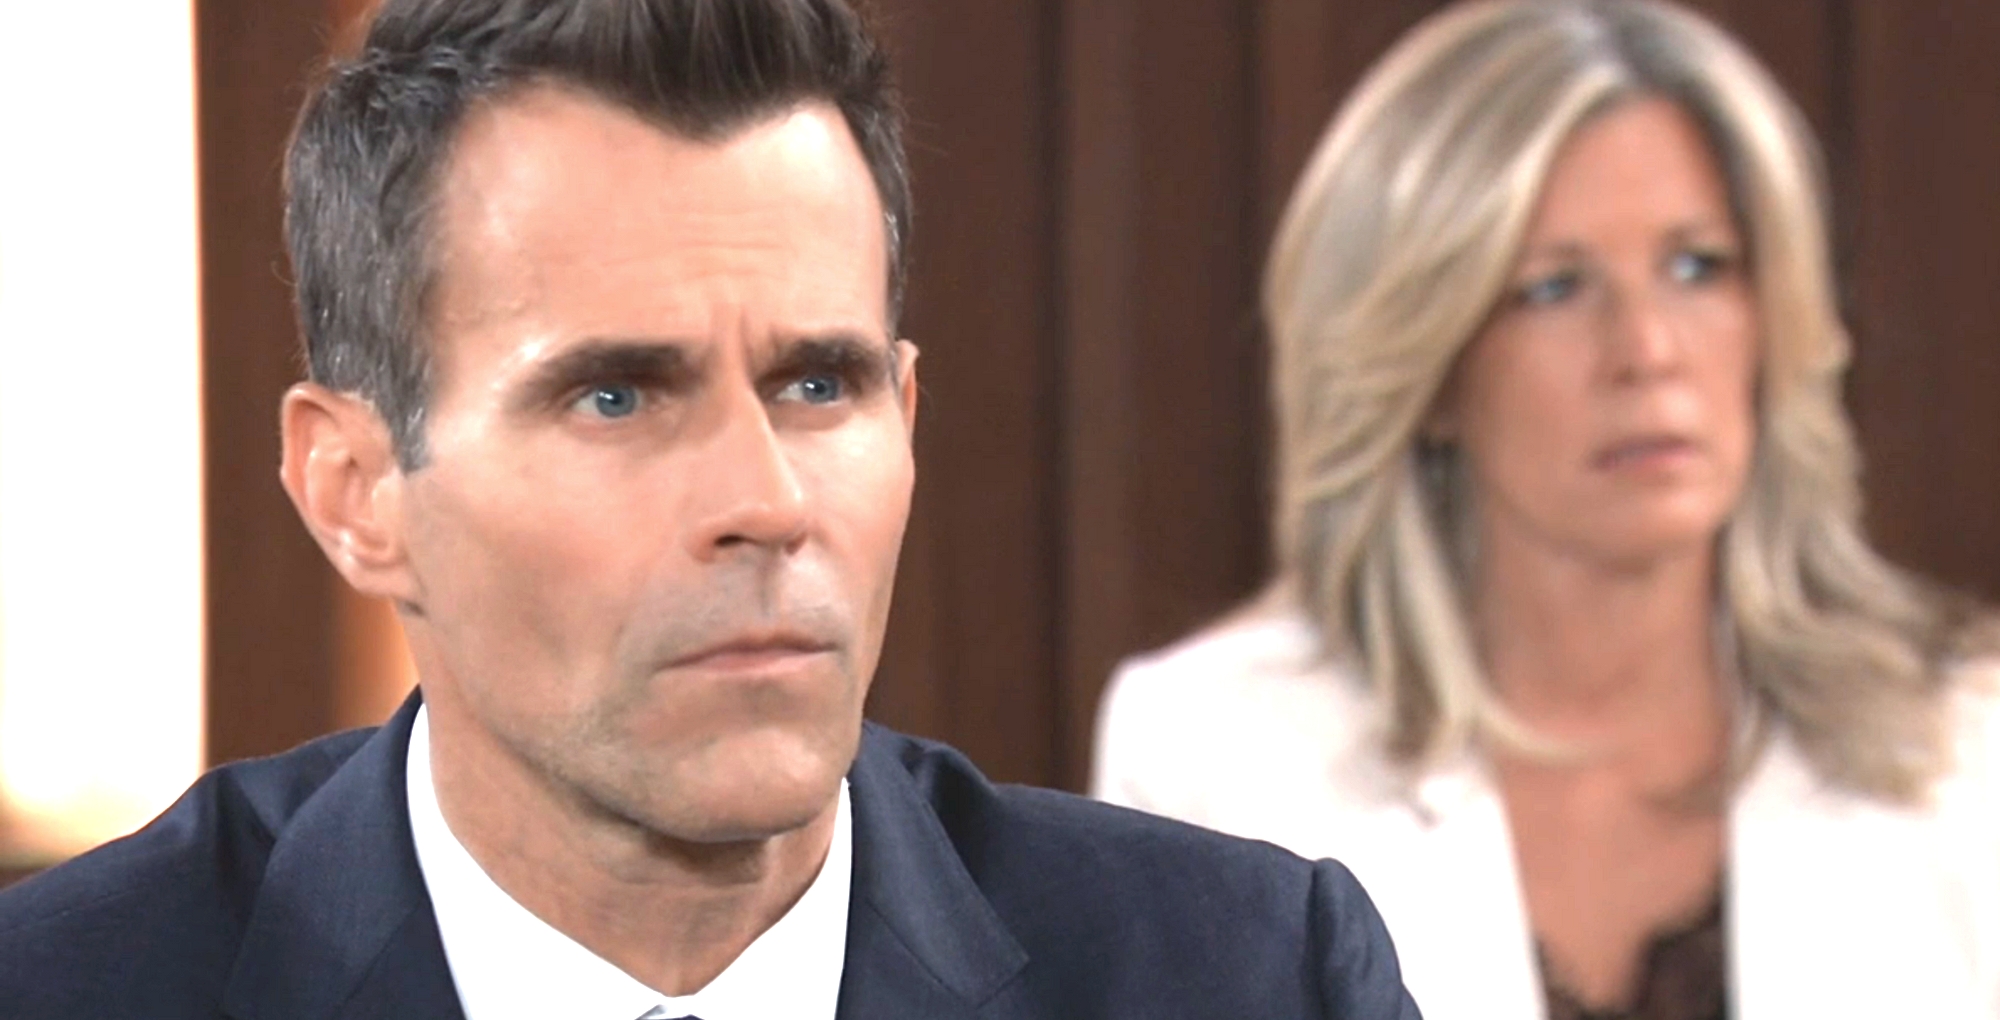 general hospital spoilers for june 23 2023 have an angry carly and drew in court.